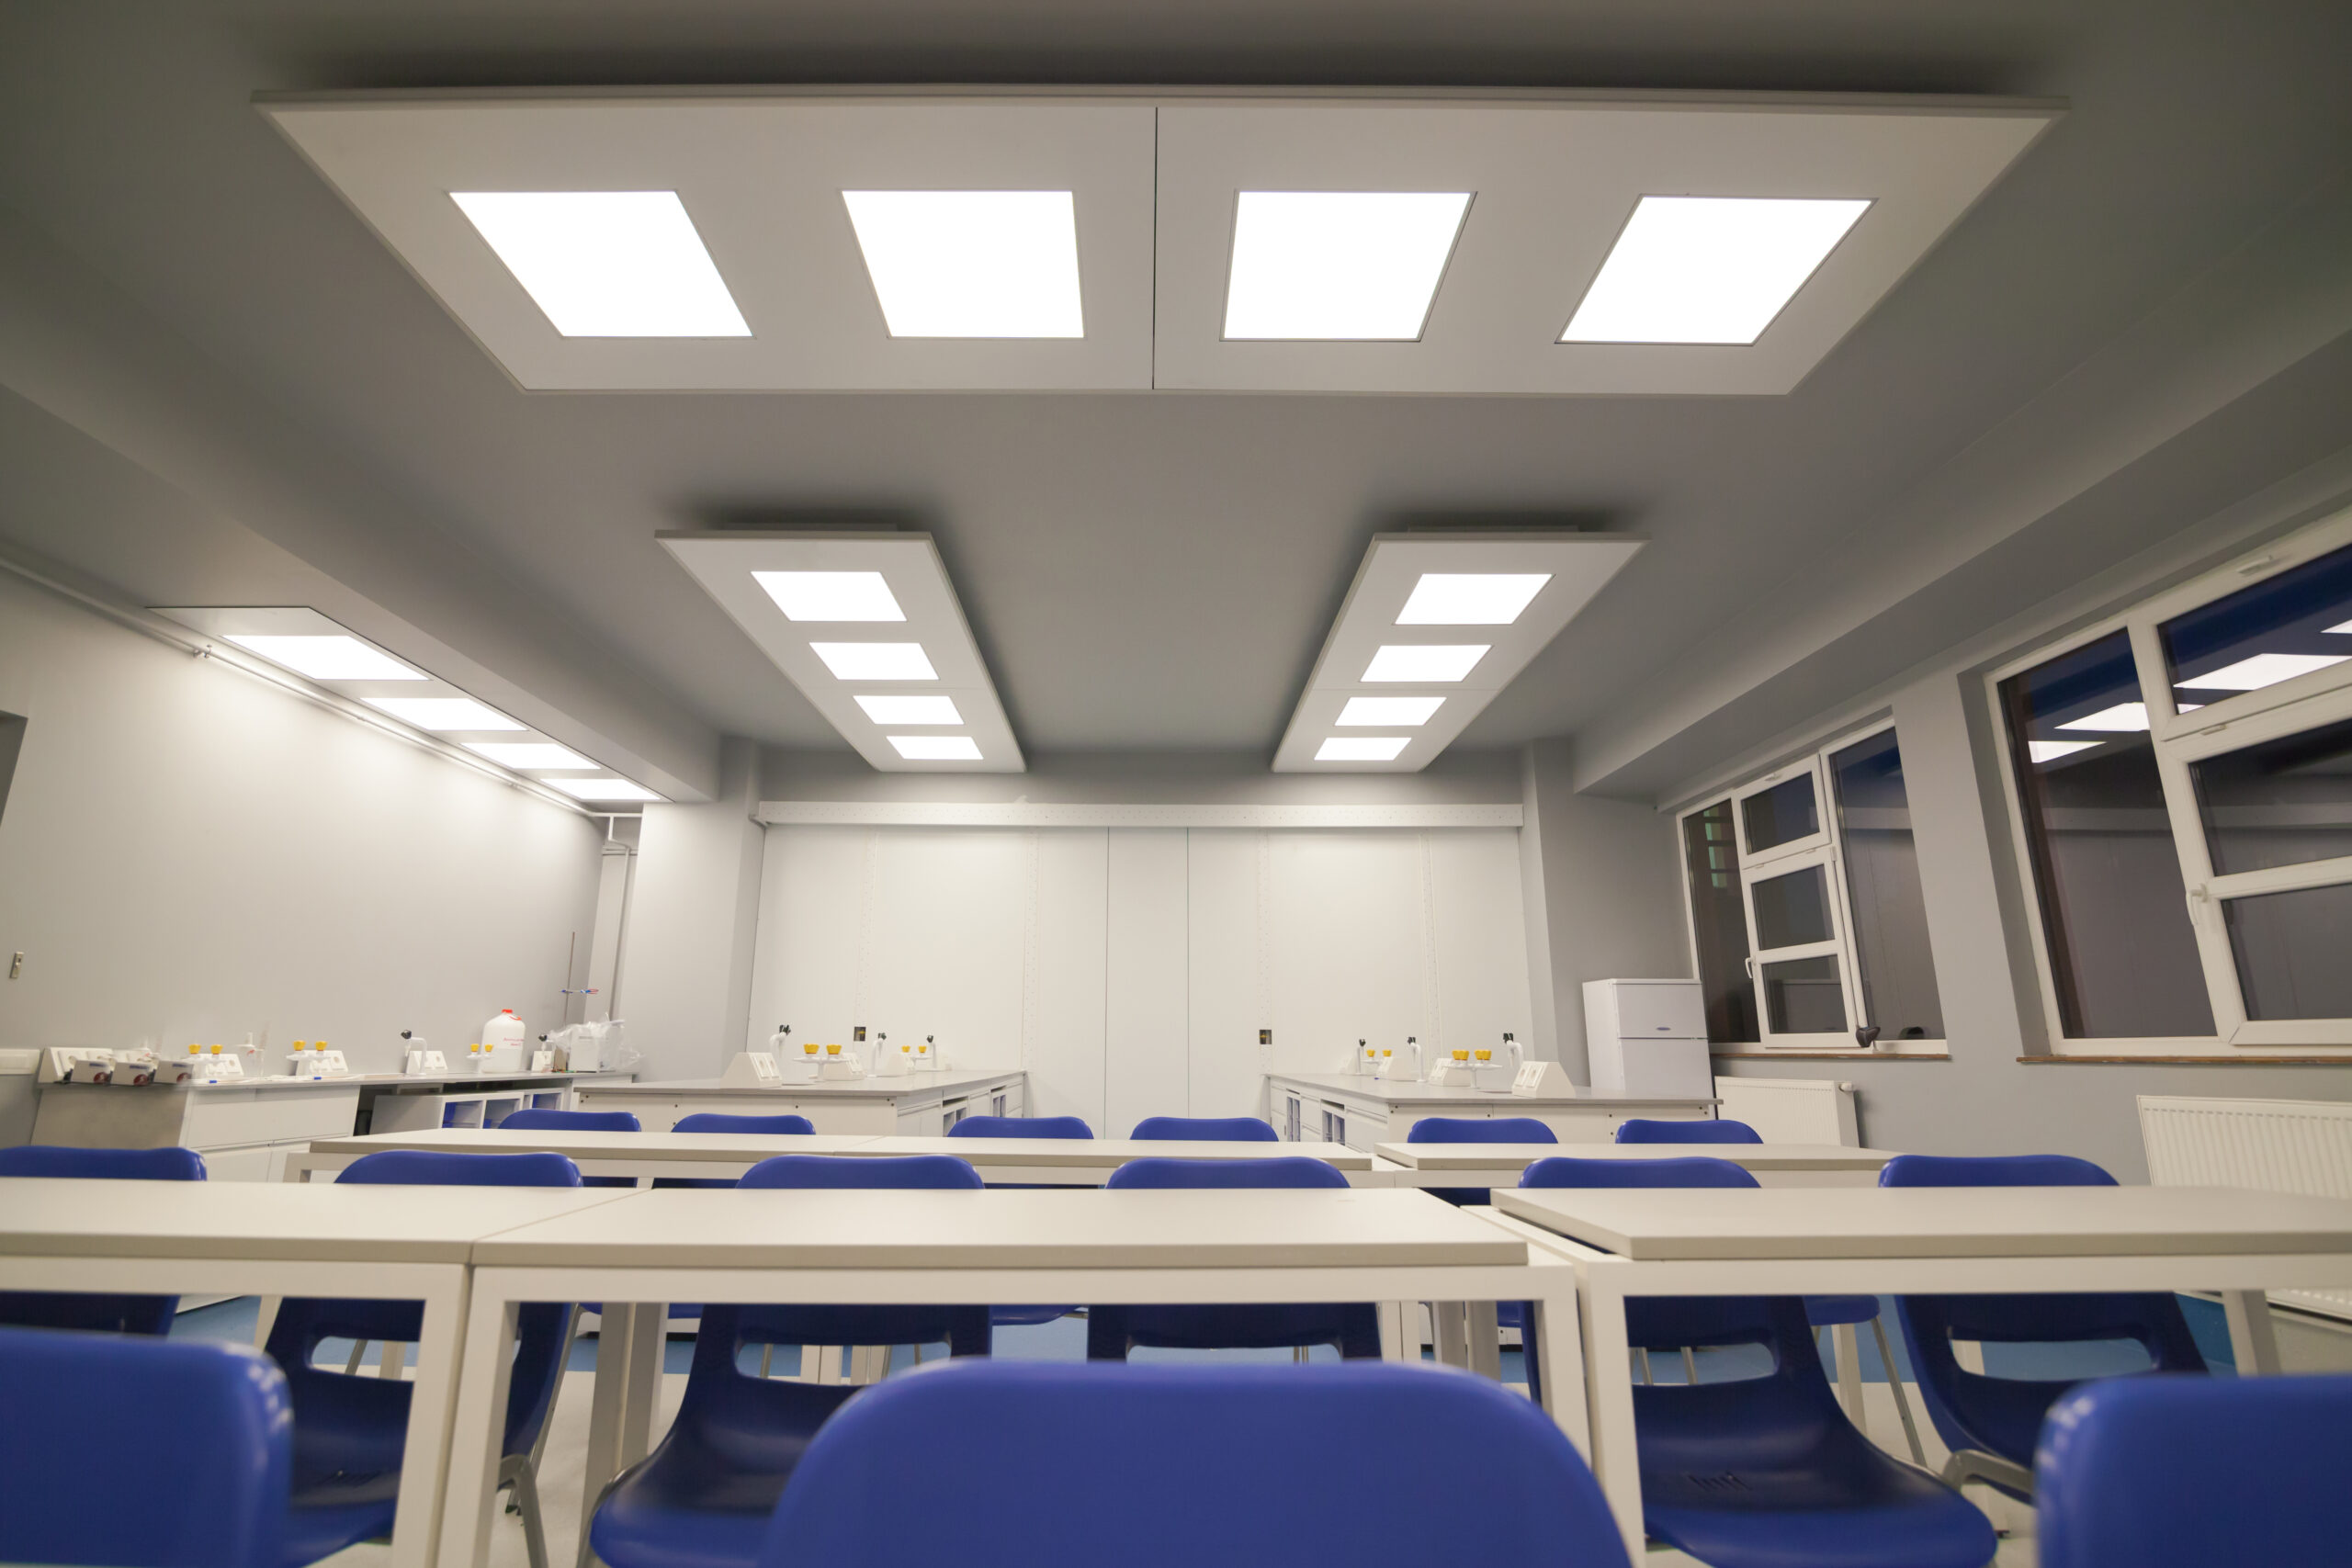 commercial lighting installation in class room